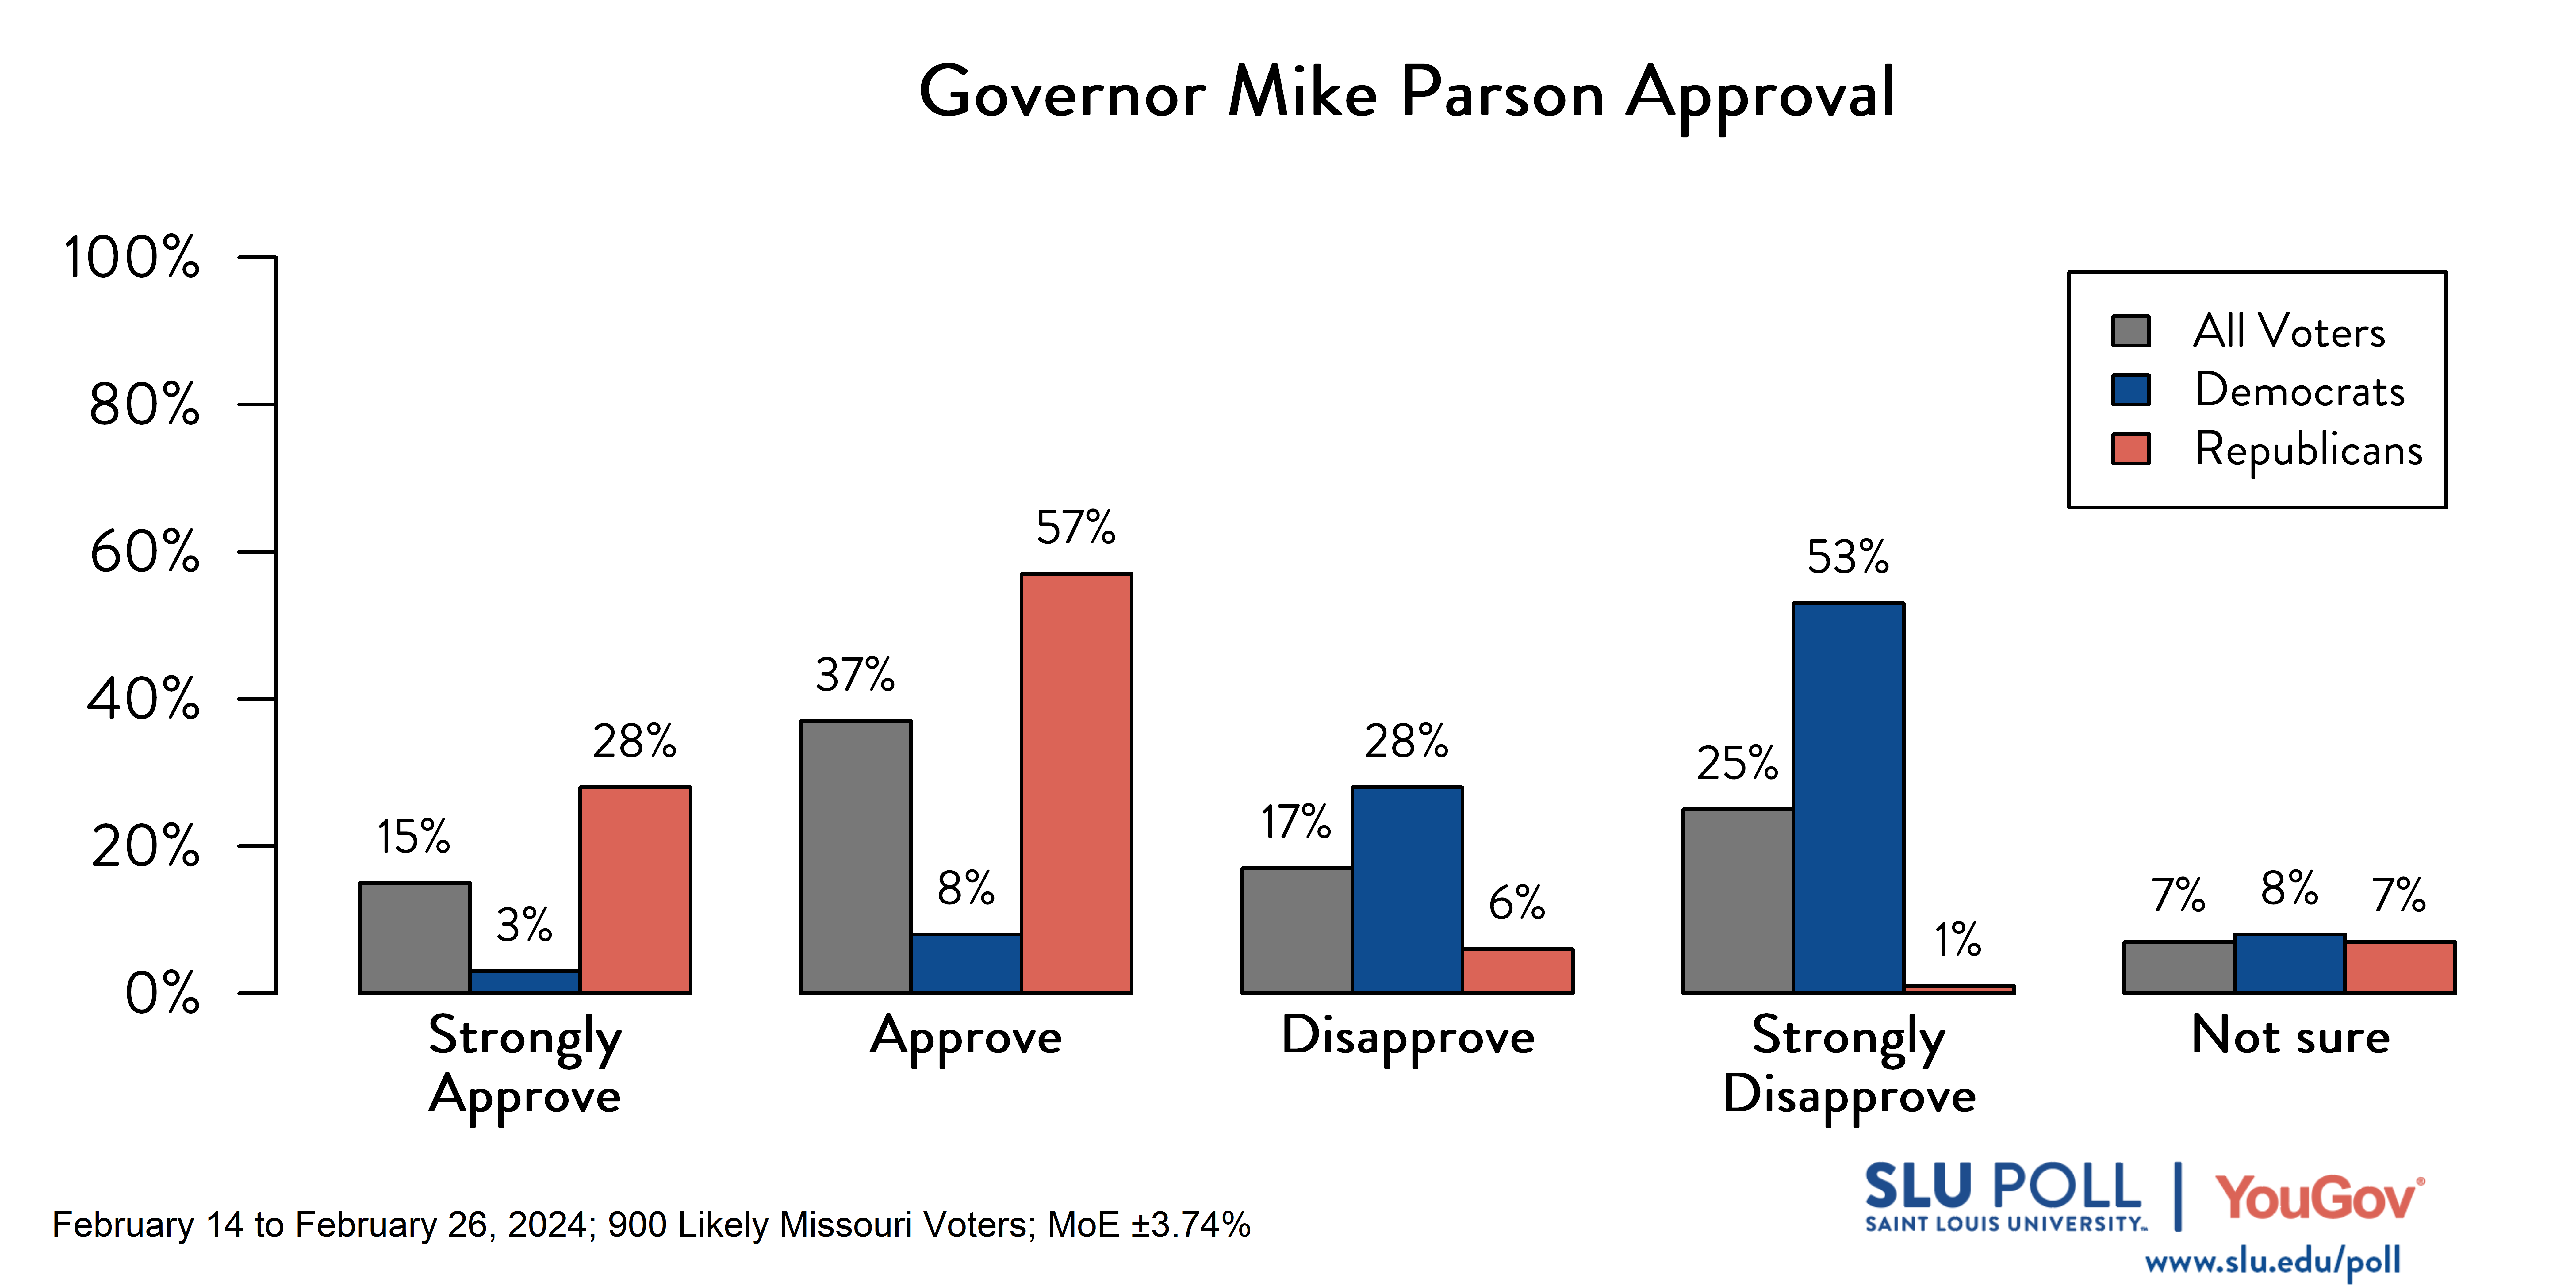 SLU/YouGov Poll results for Mike Parson approval question